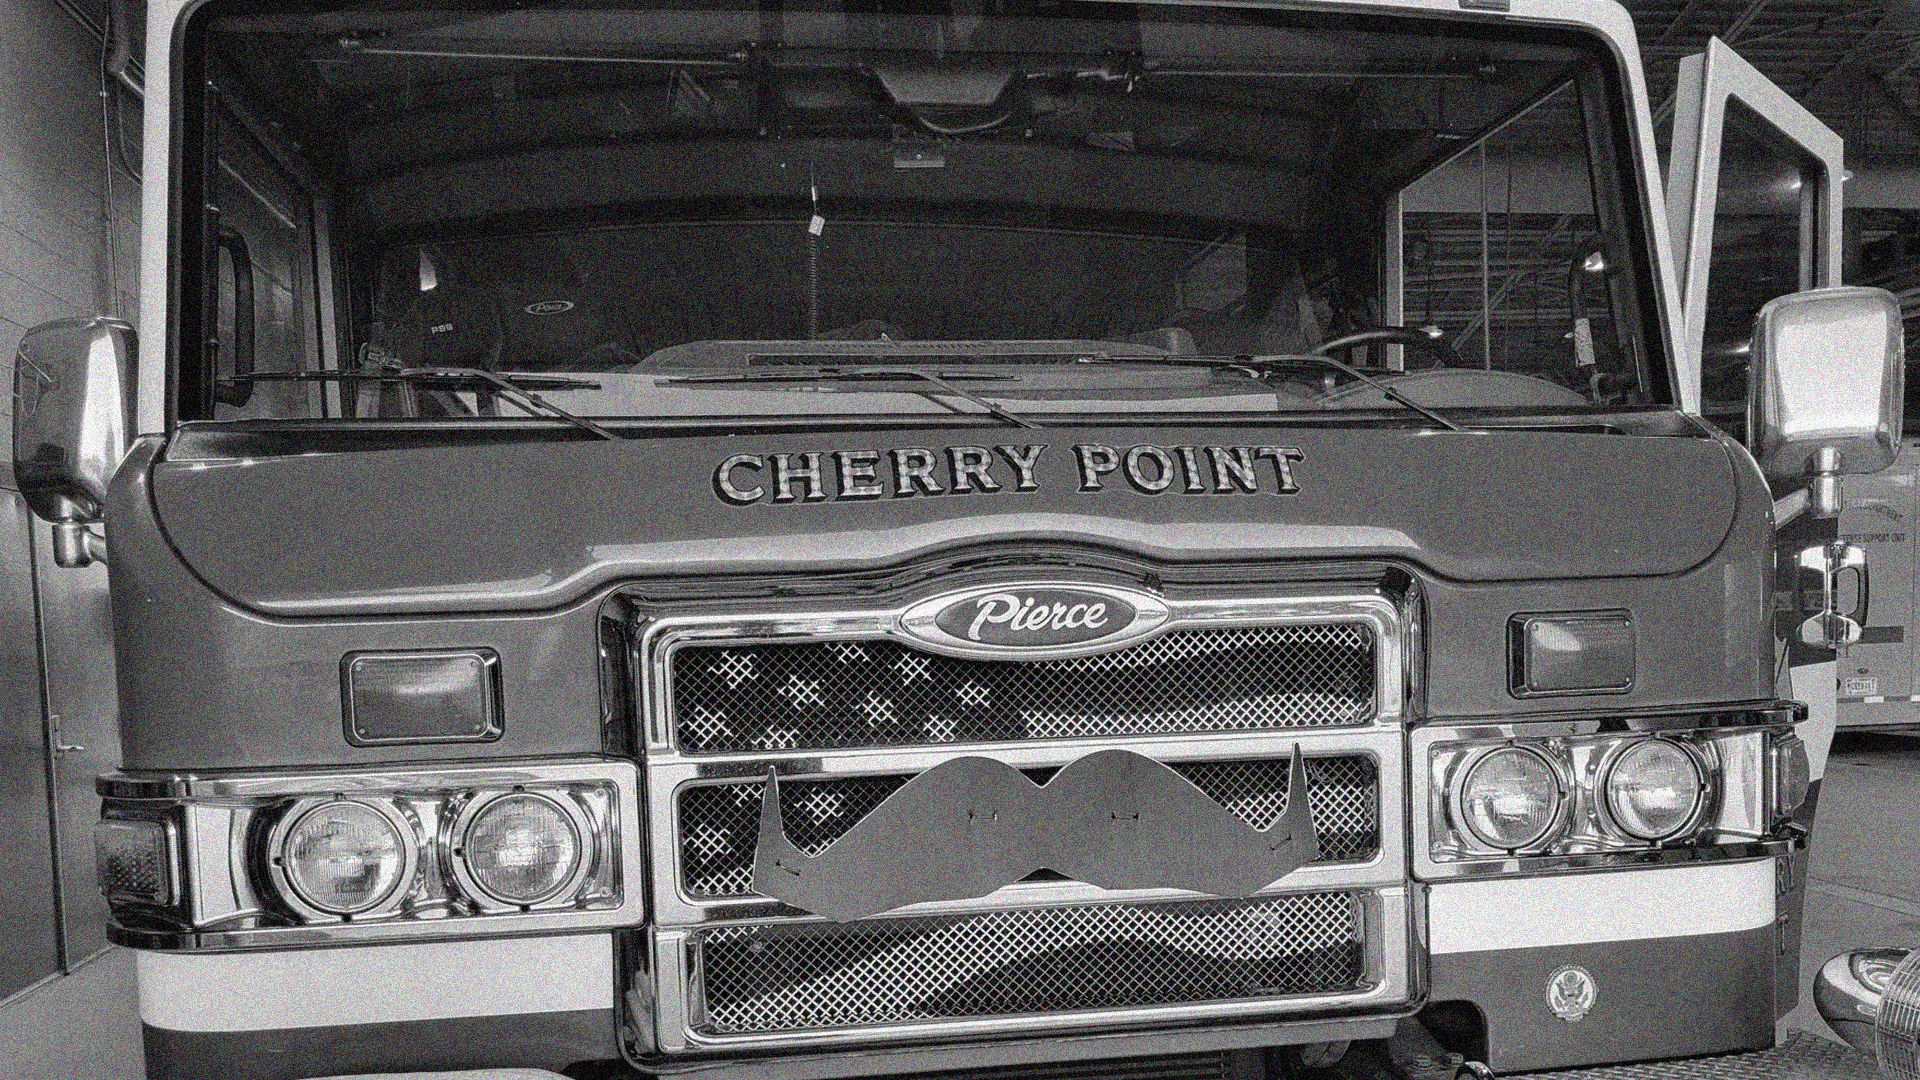 A black and white photo of the cropped front of fire truck. It says "Cherry Point" on it and has a moustache decal